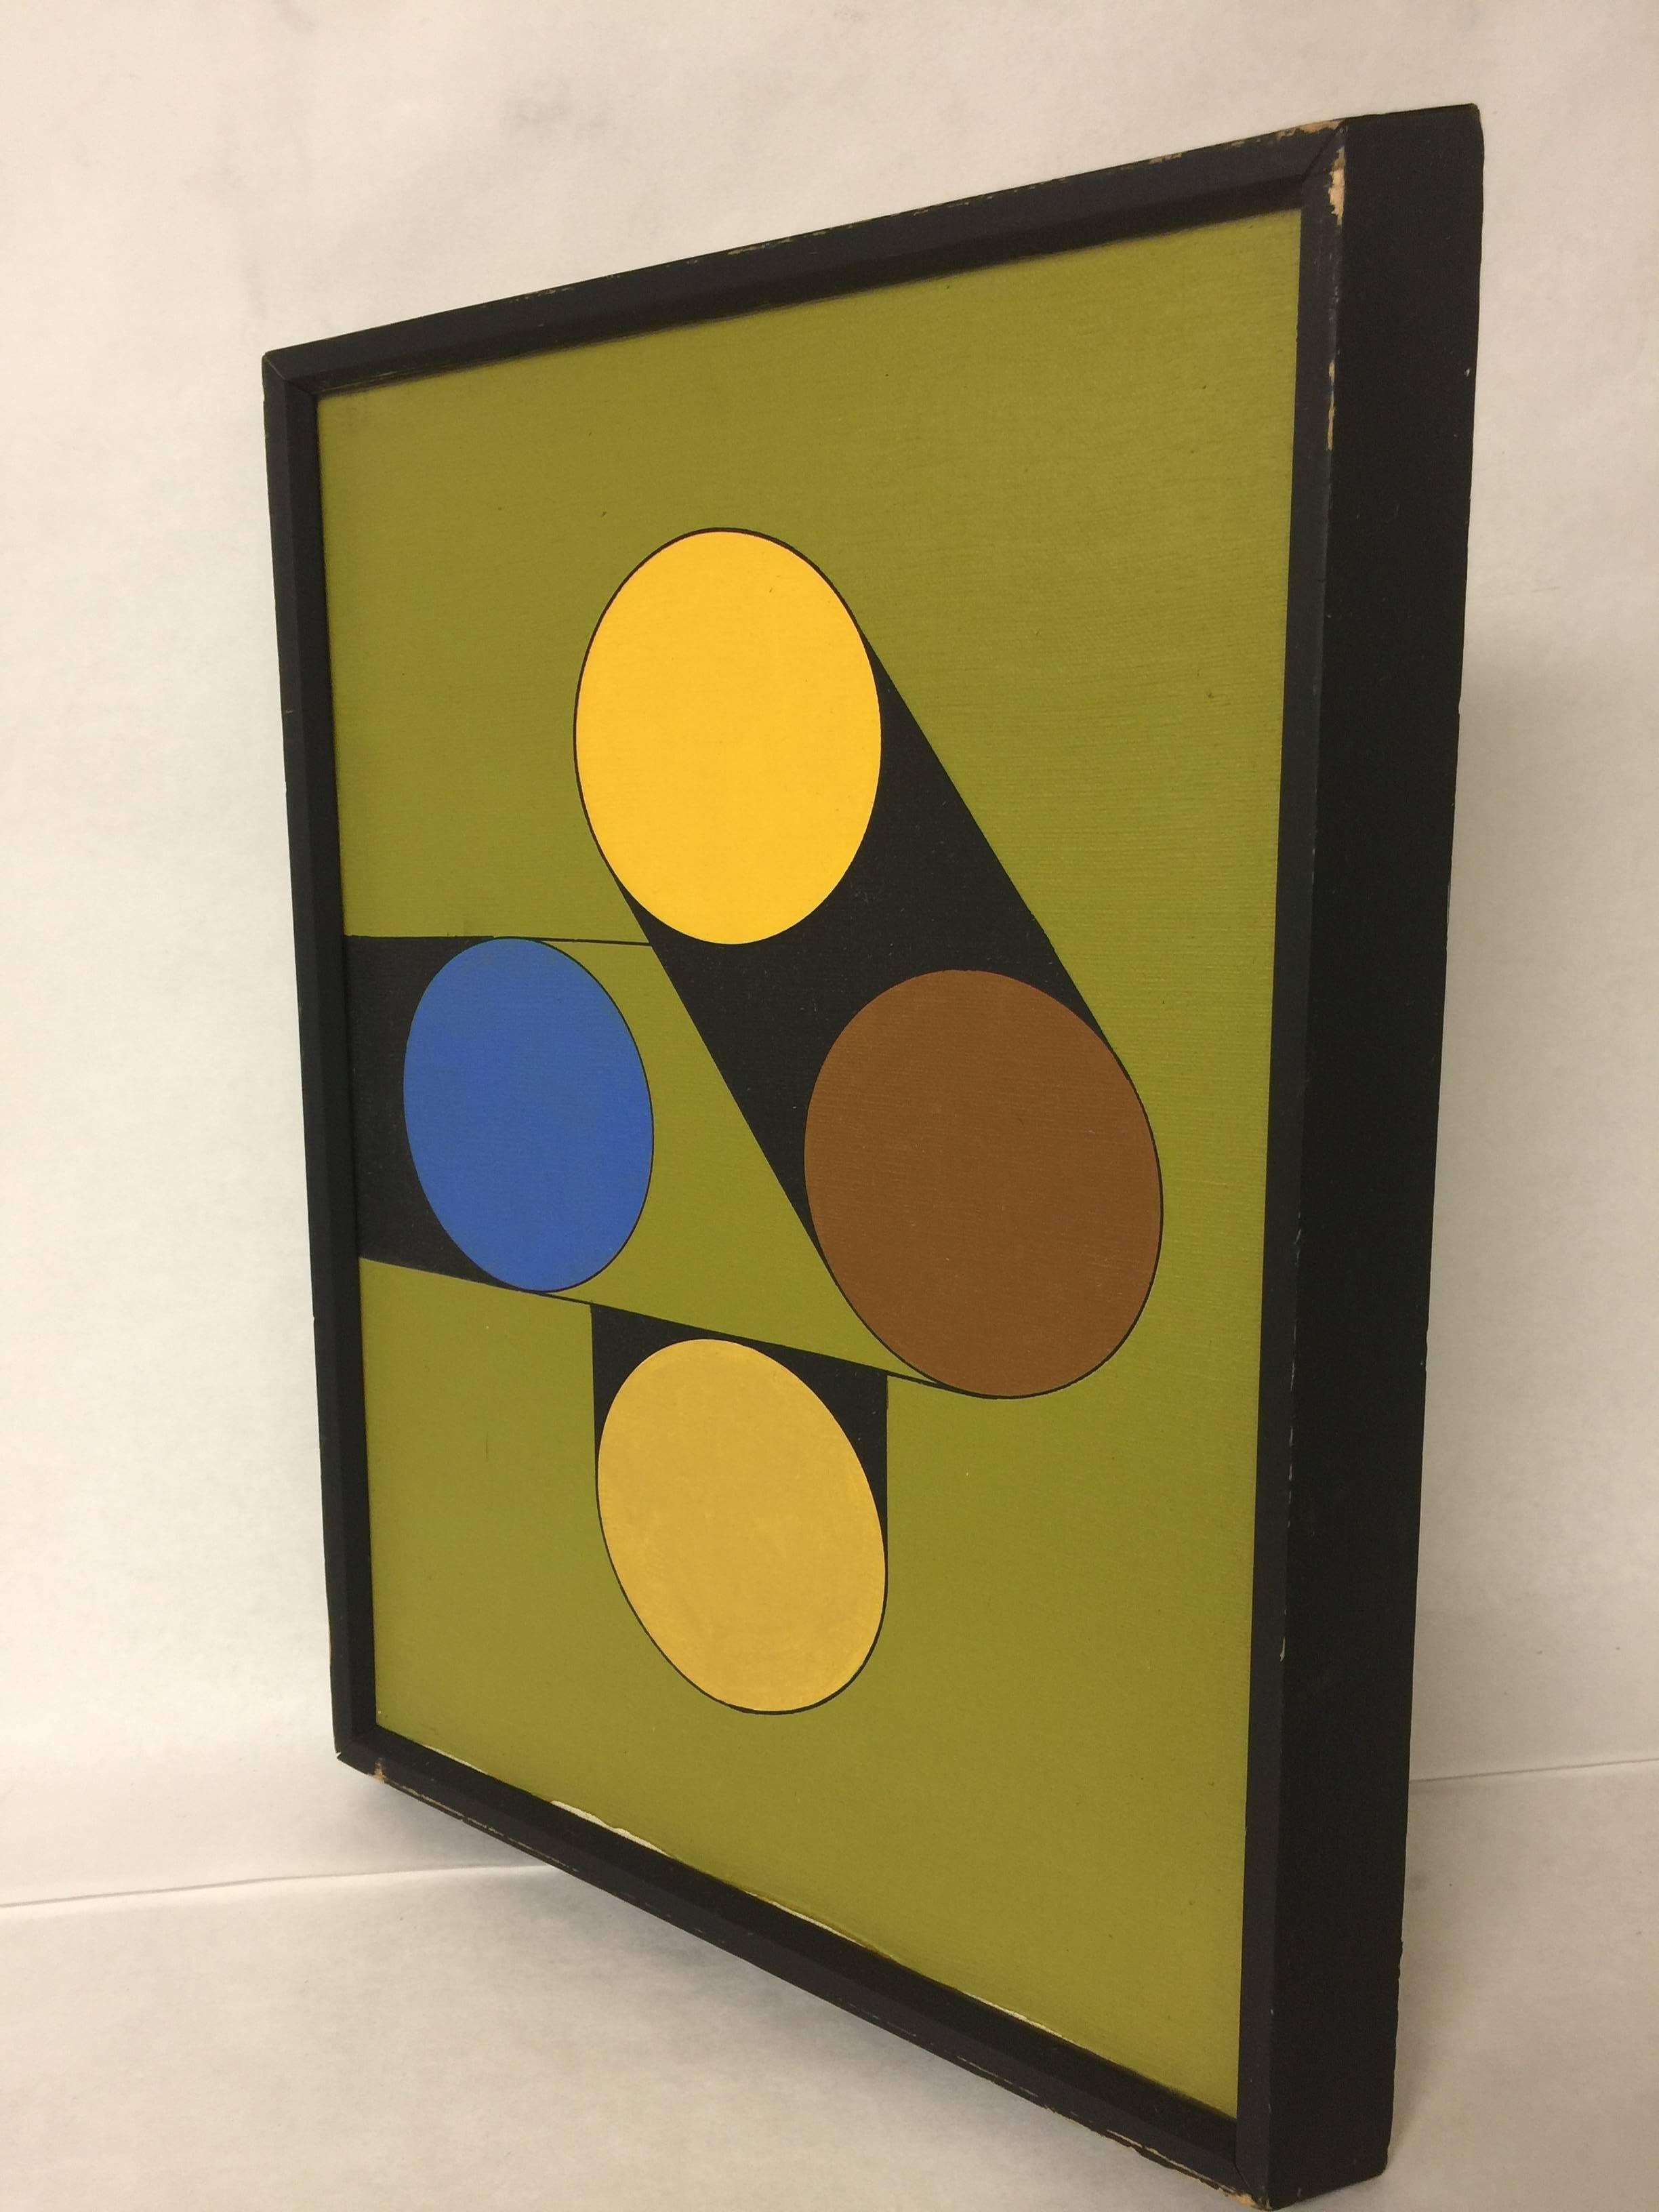 Vintage circa 1980s Hard Edge Geometric Abstract Oil on Canvas Painting 1 of 5 2